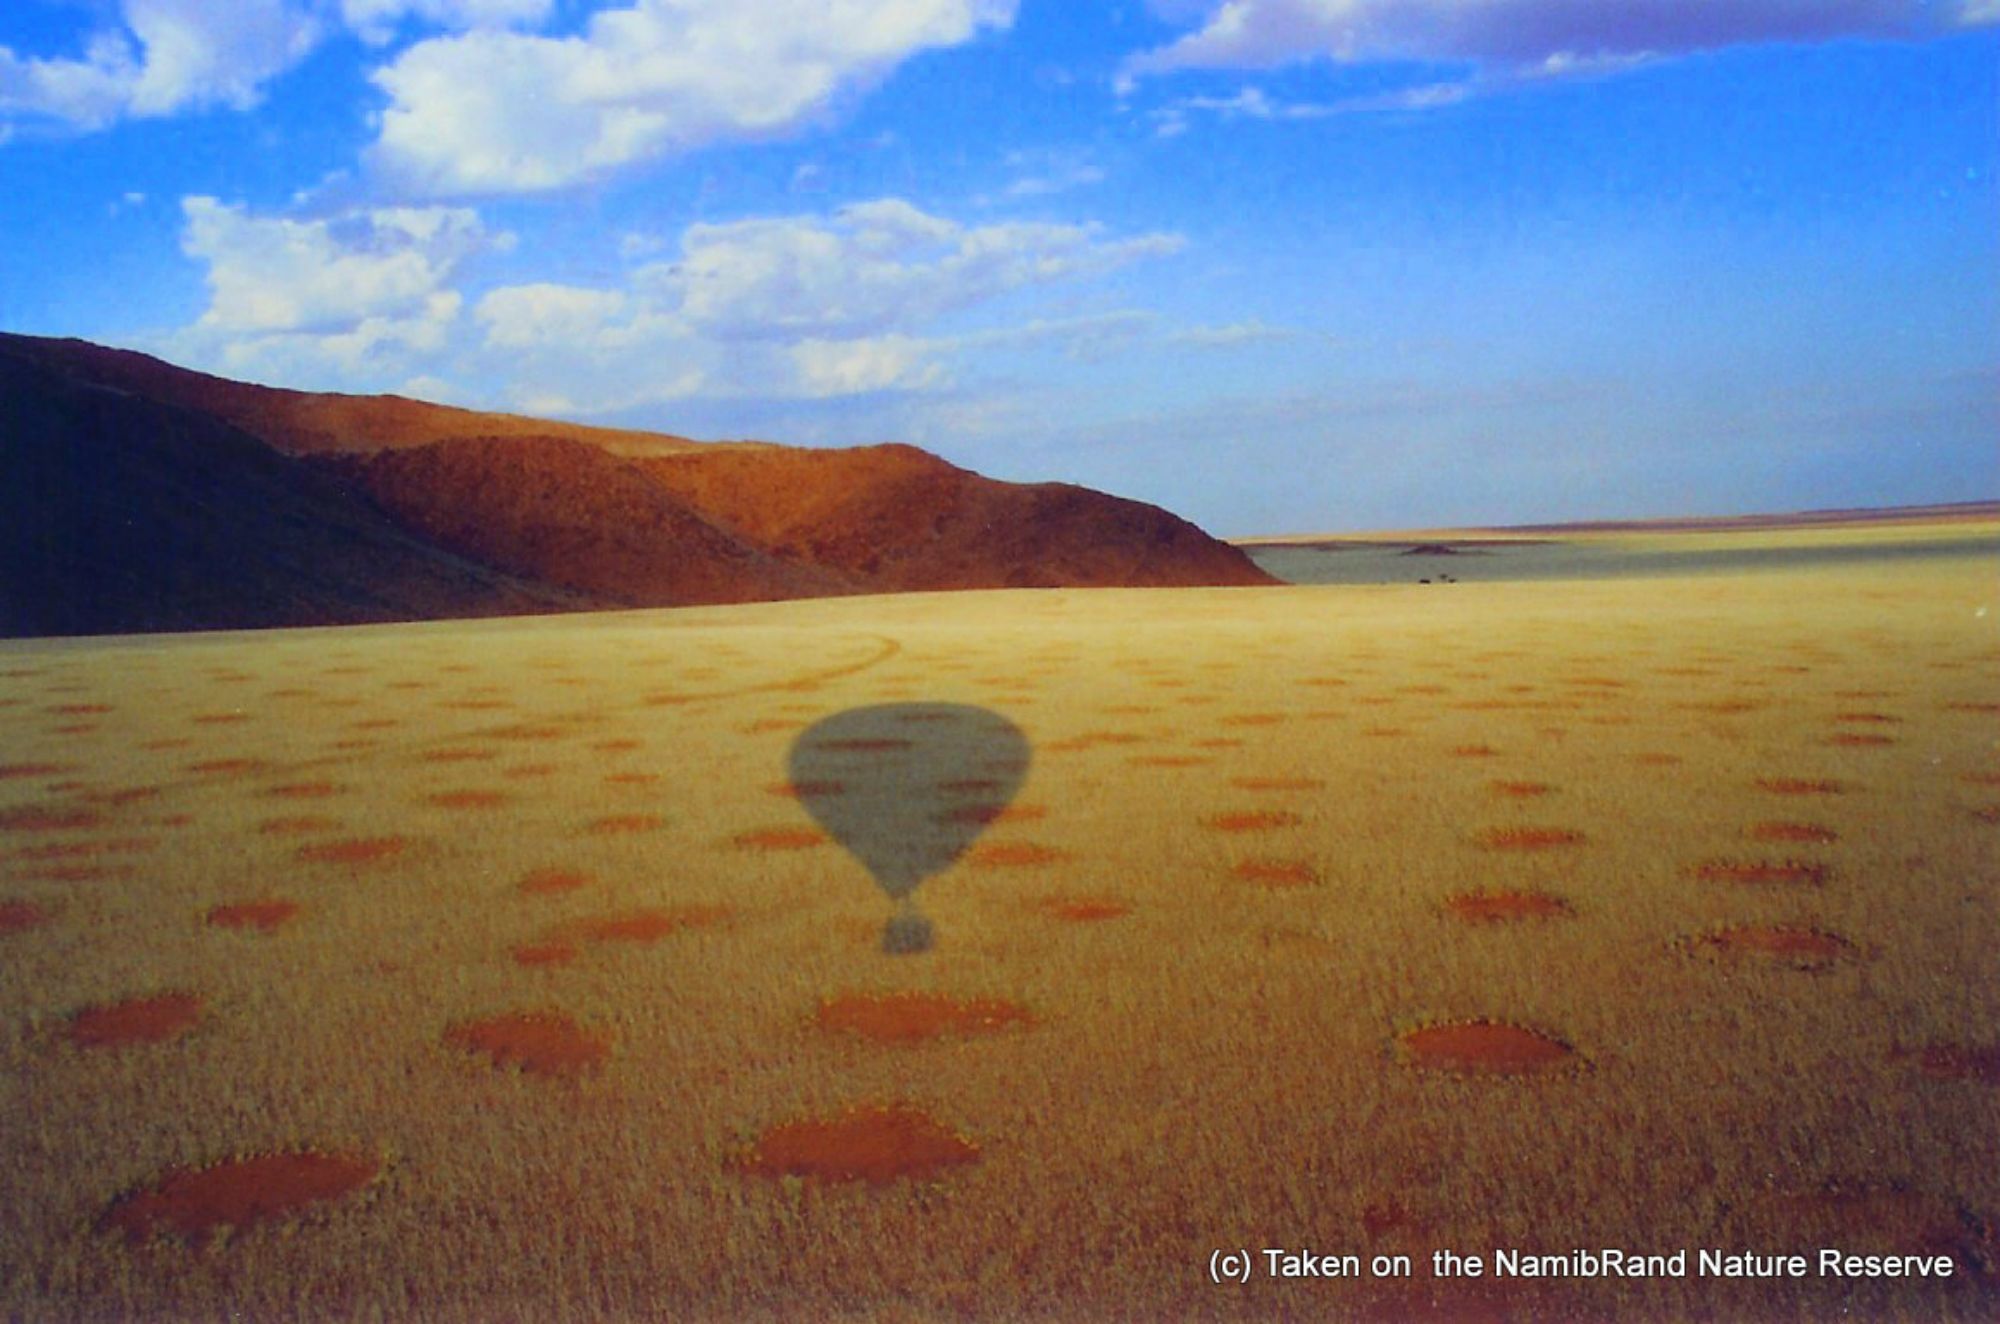 Namibia's fairy circles: Has one of nature's great mysteries been solved?